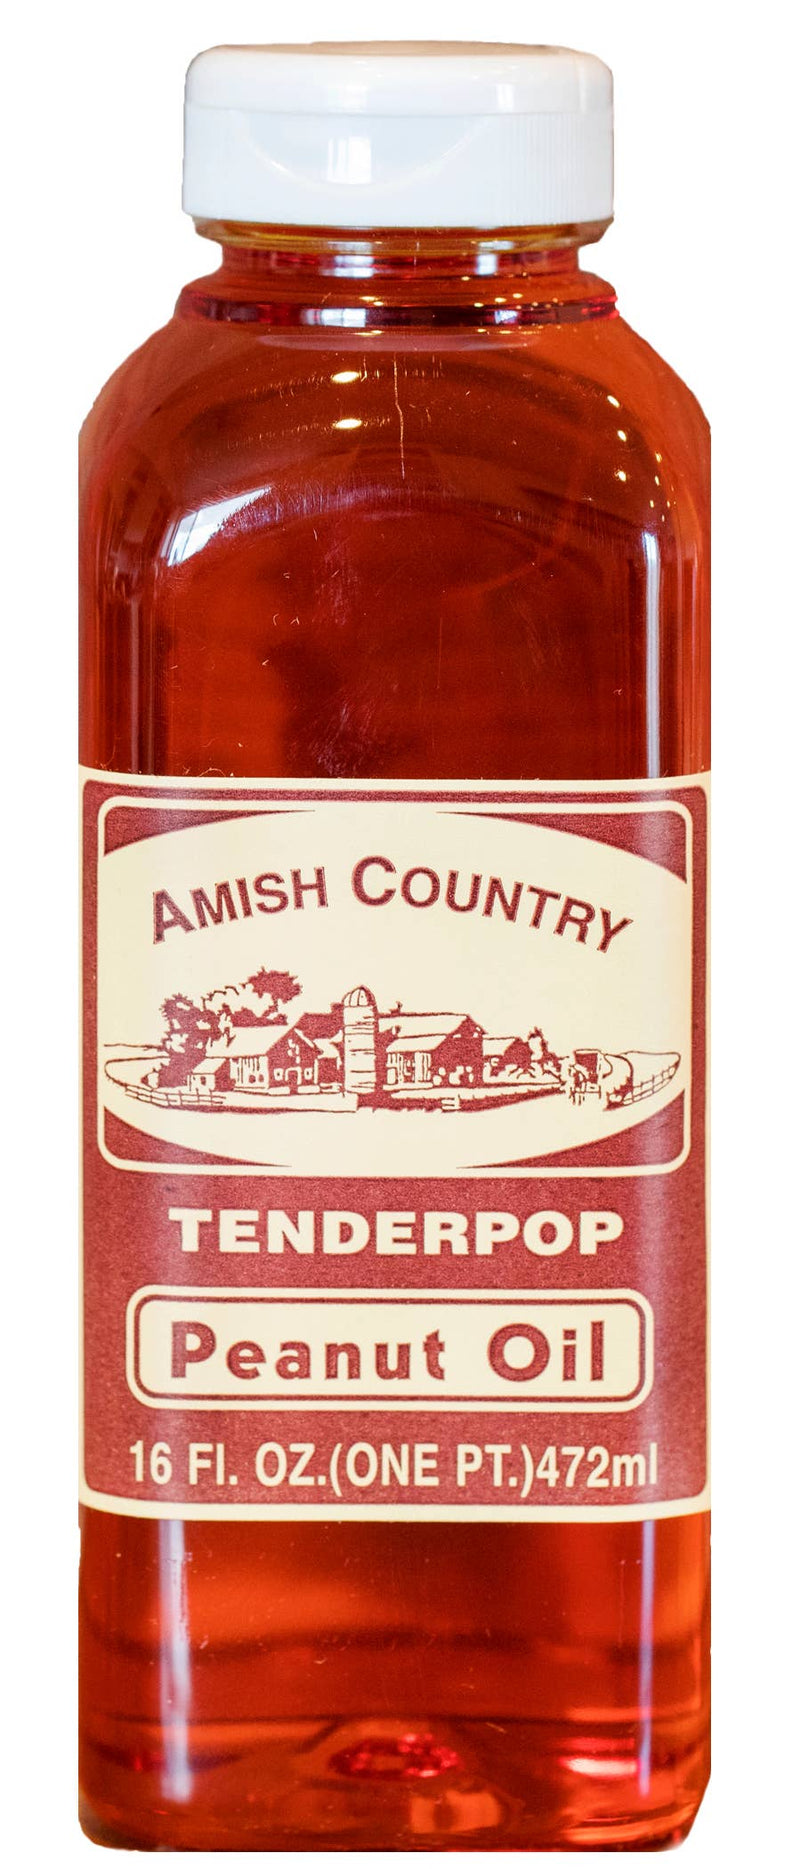 Amish Country Popcorn - 16oz. Bottle of Peanut Oil